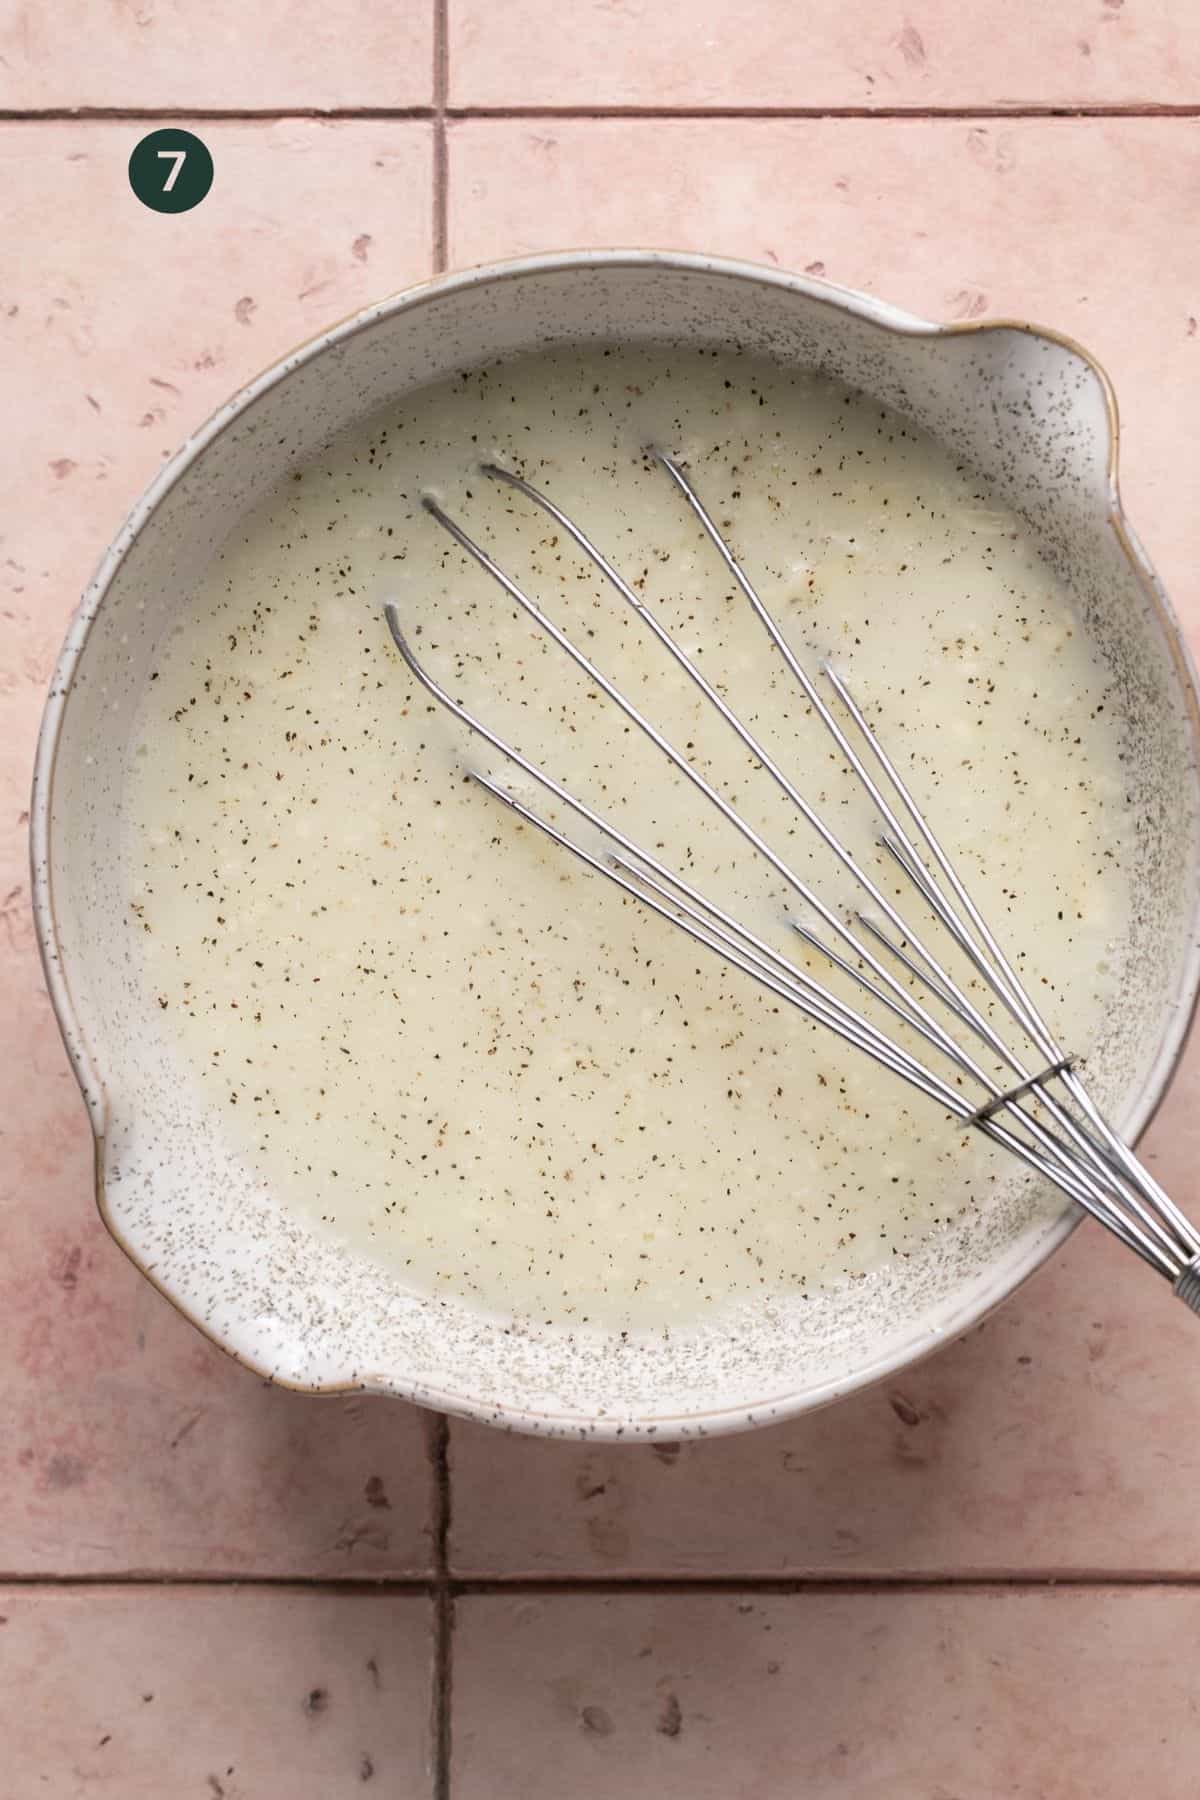 Liquid egg whites, milk, cheese, salt and pepper whisked in a large bowl. 